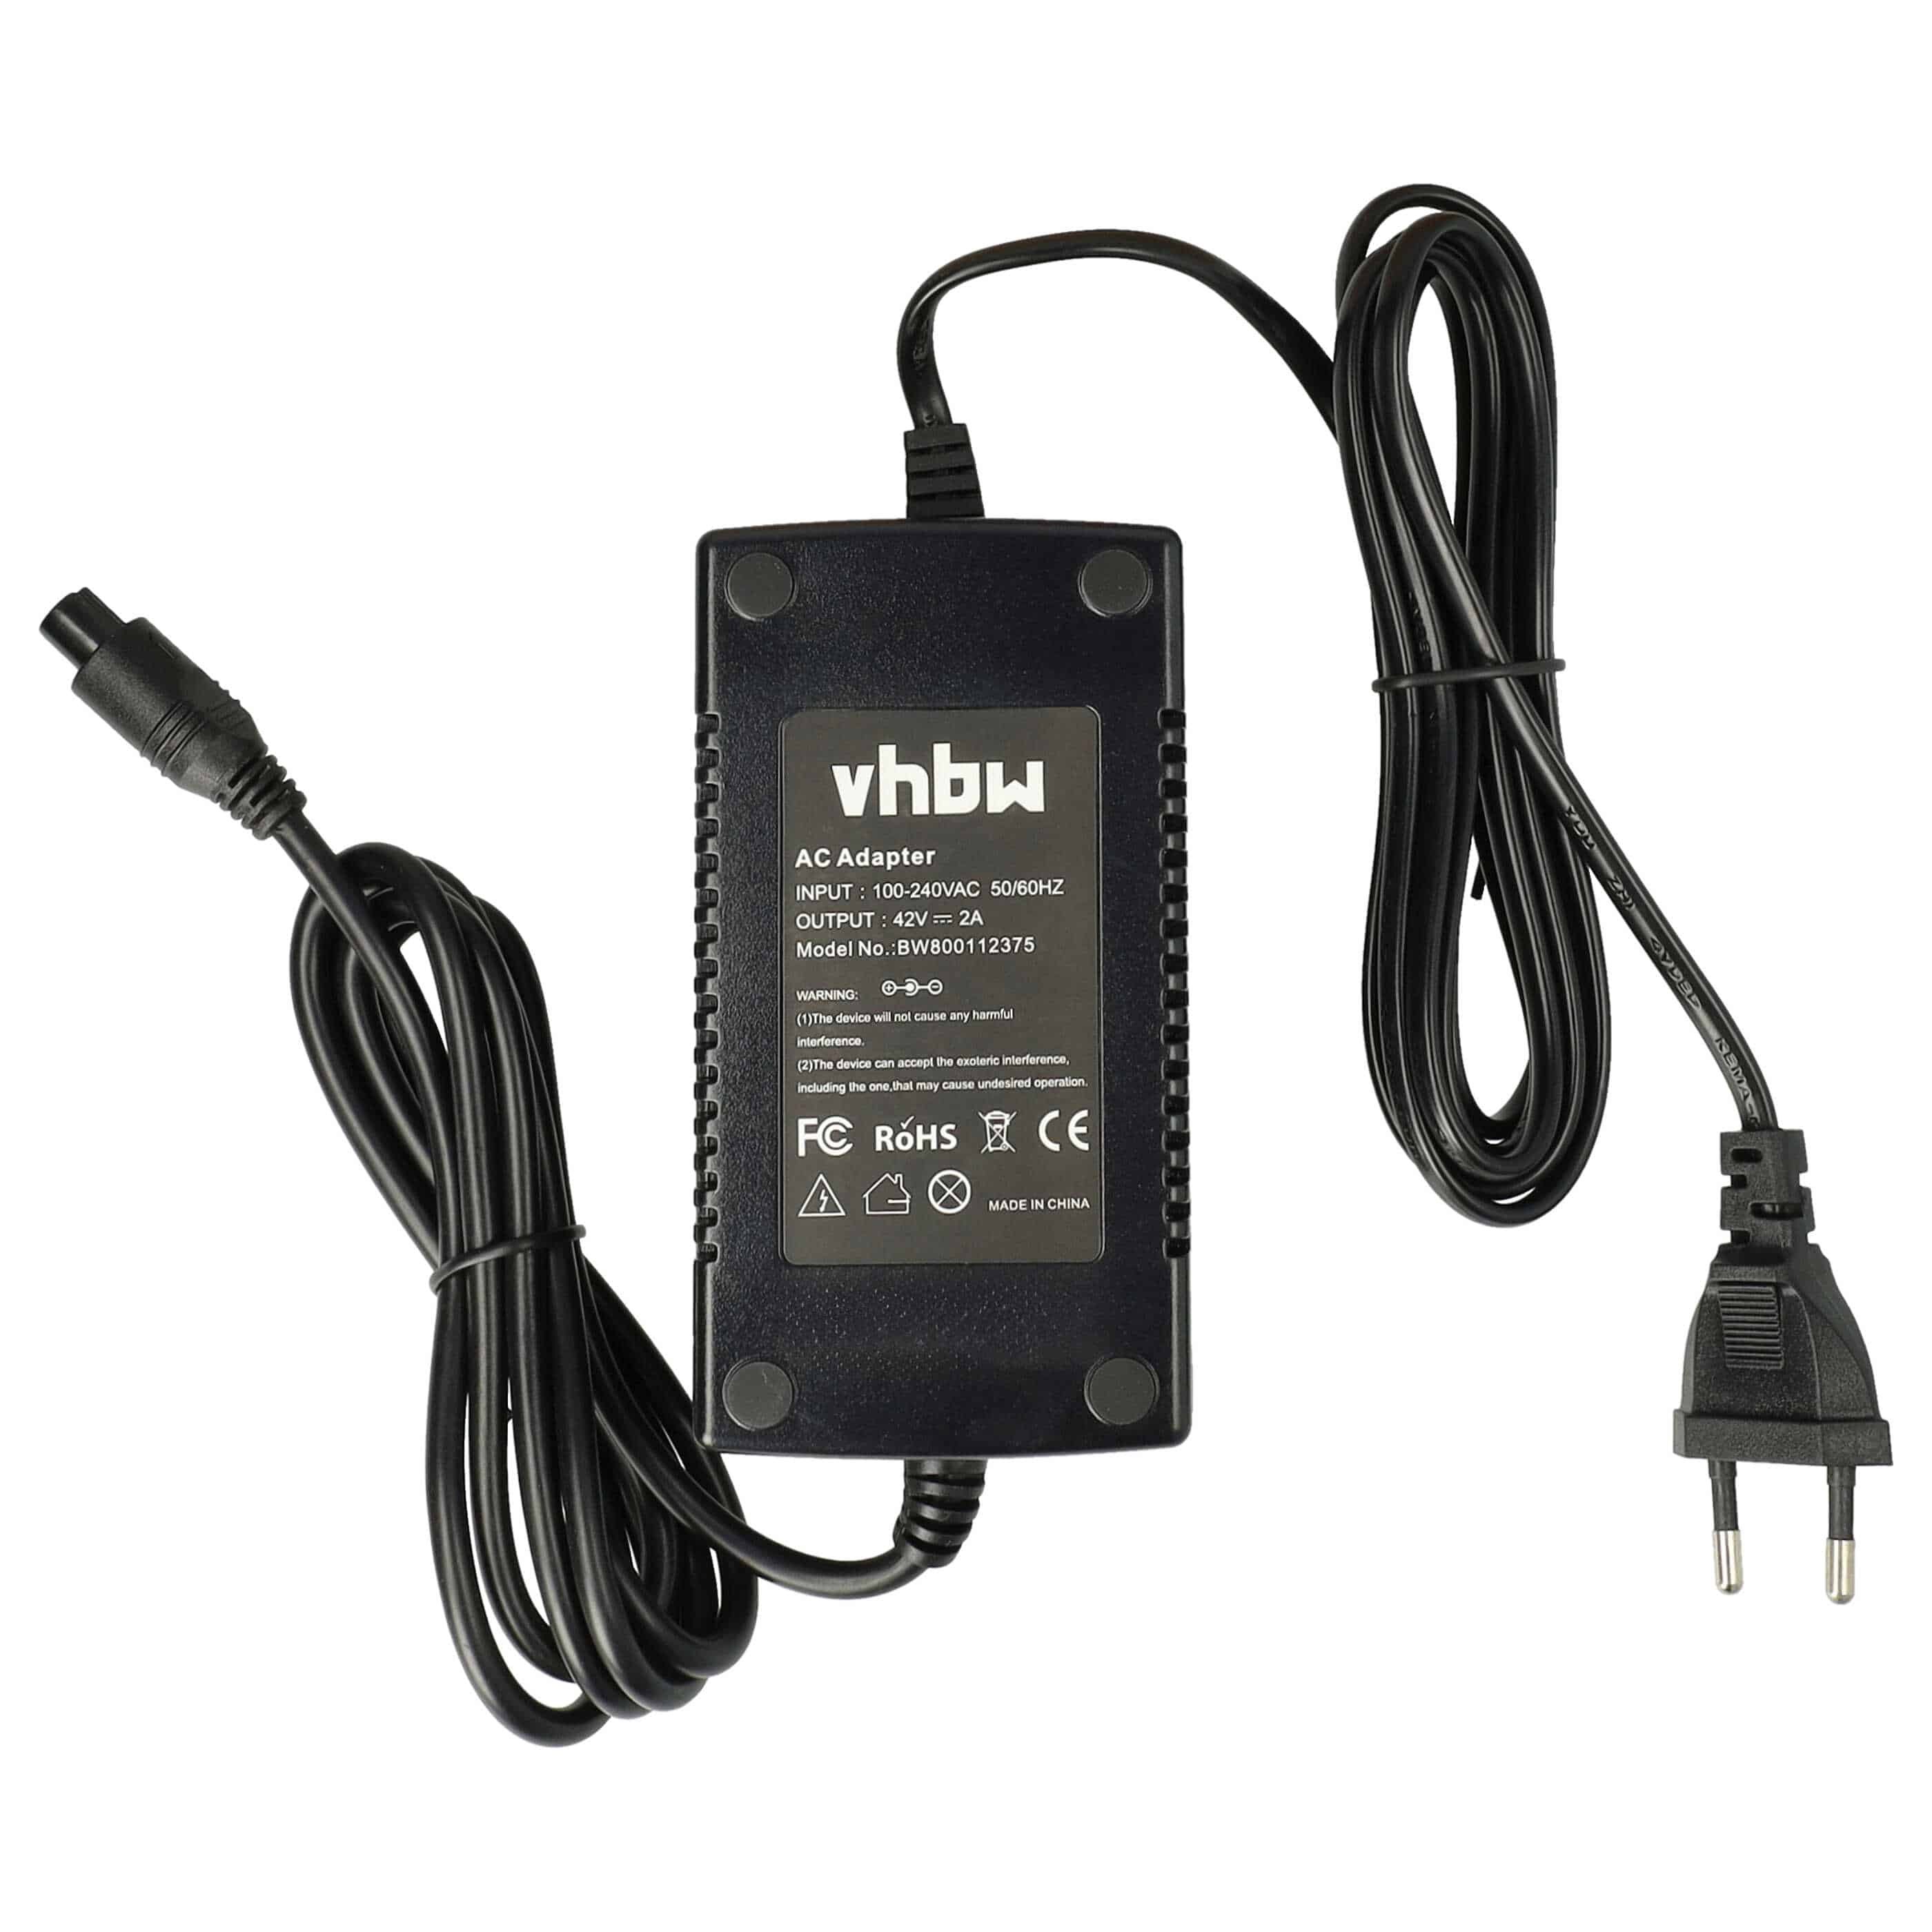 Charger suitable for Bluewheel HX310 Hoverboard, Scooter - 200 cm